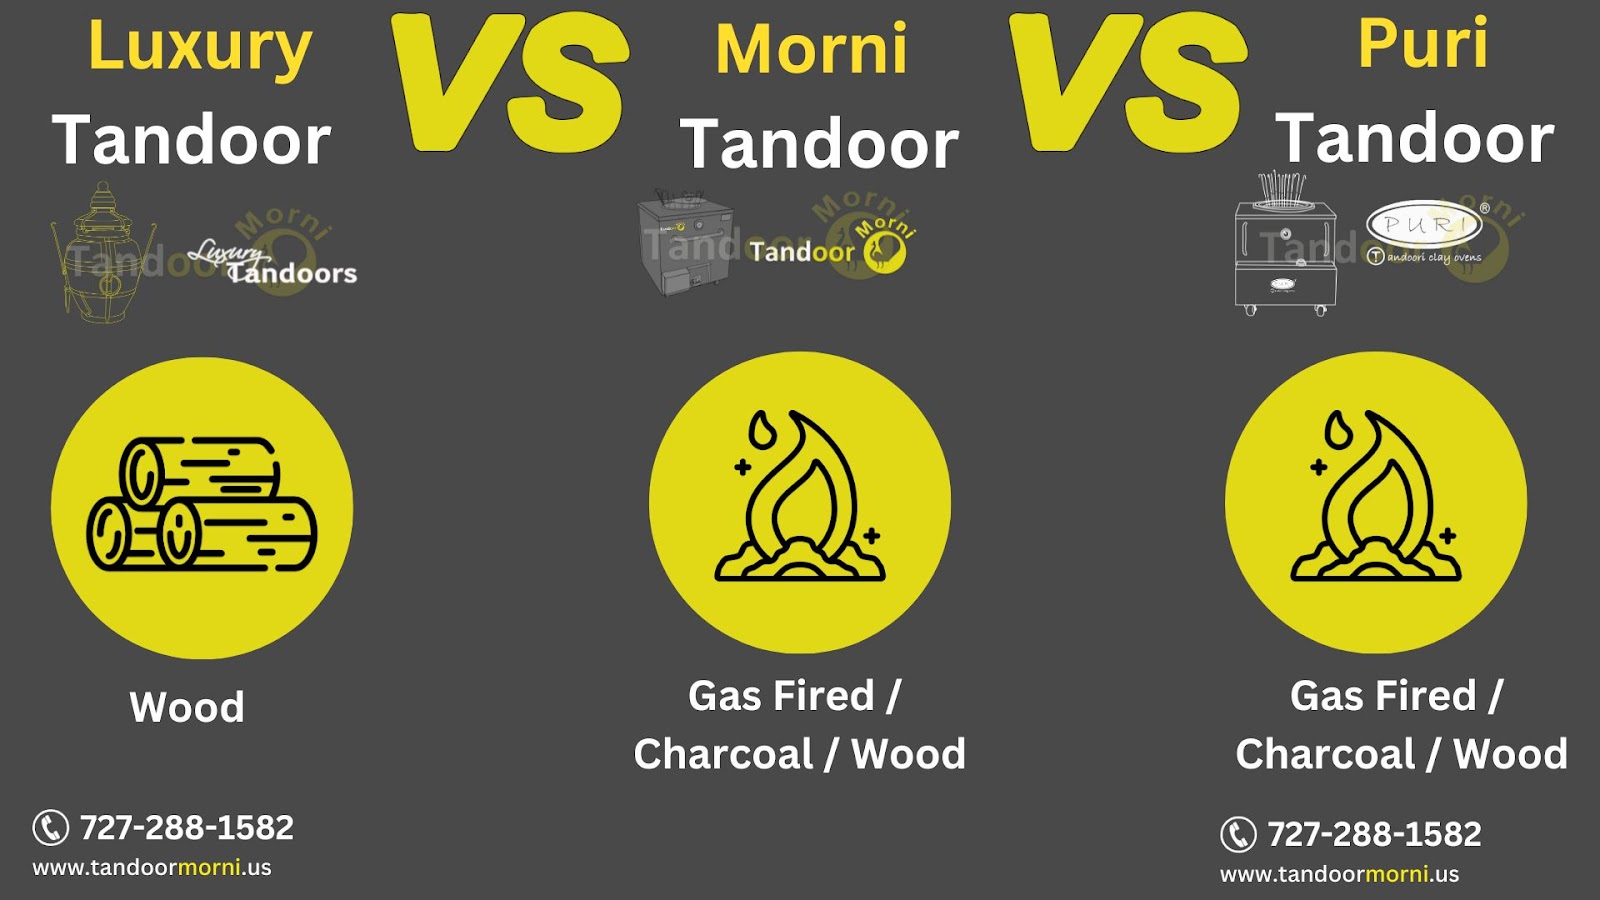 Luxury Tandoors can be used with wood, whilst Morni Tandoors can be used with gas, charcoal, or wood and Puri Tandoor can be used with gas, charcoal, or wood.